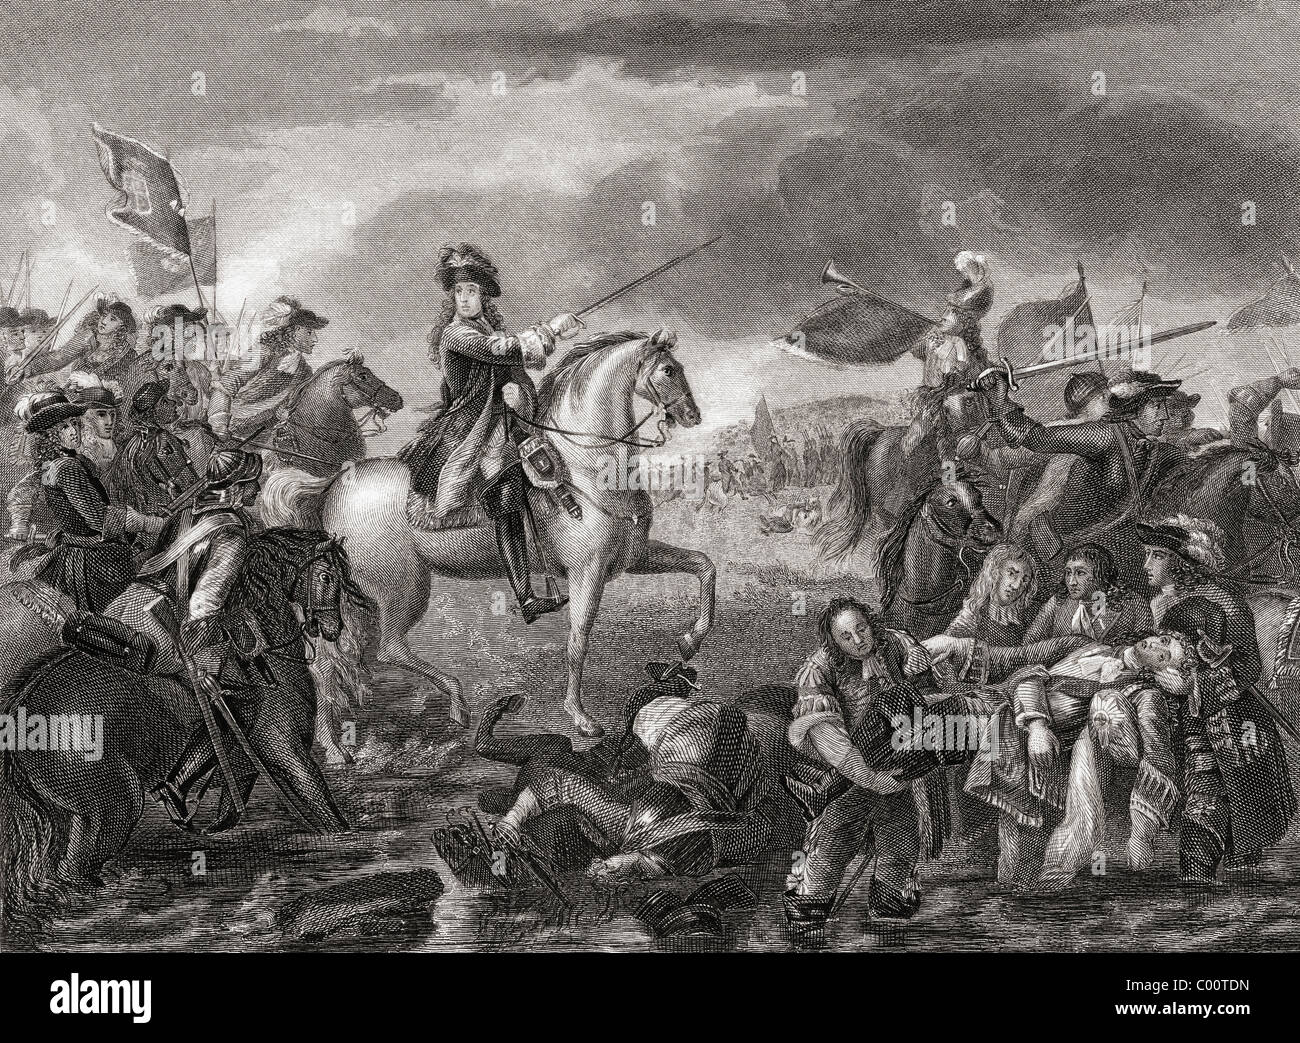 King William III, 1650 - 1702 at the Battle of the Boyne, Ireland in 1690. Stock Photo